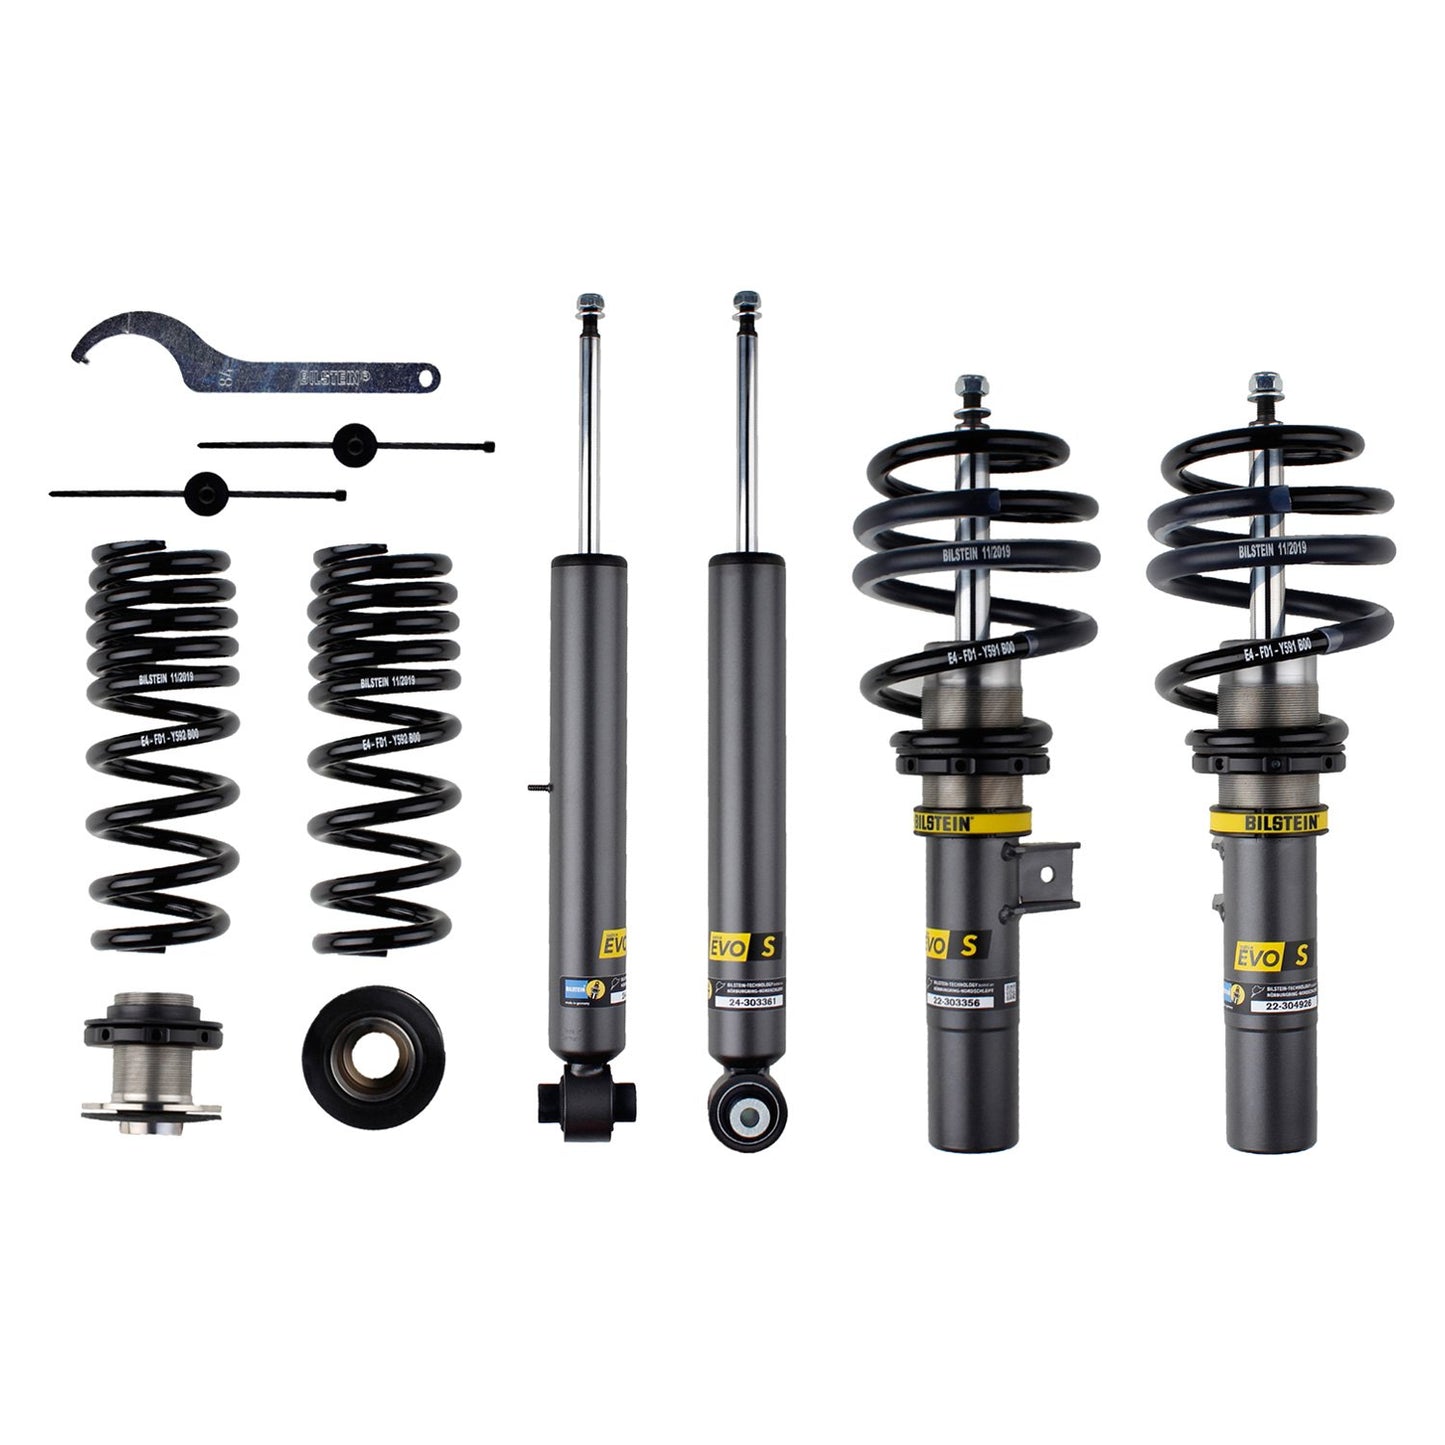 BMW Bilstein - 1.4"-2" x 1.2"-2.2" EVO S Front and Rear Lowering Coilover Kit - 47-300118